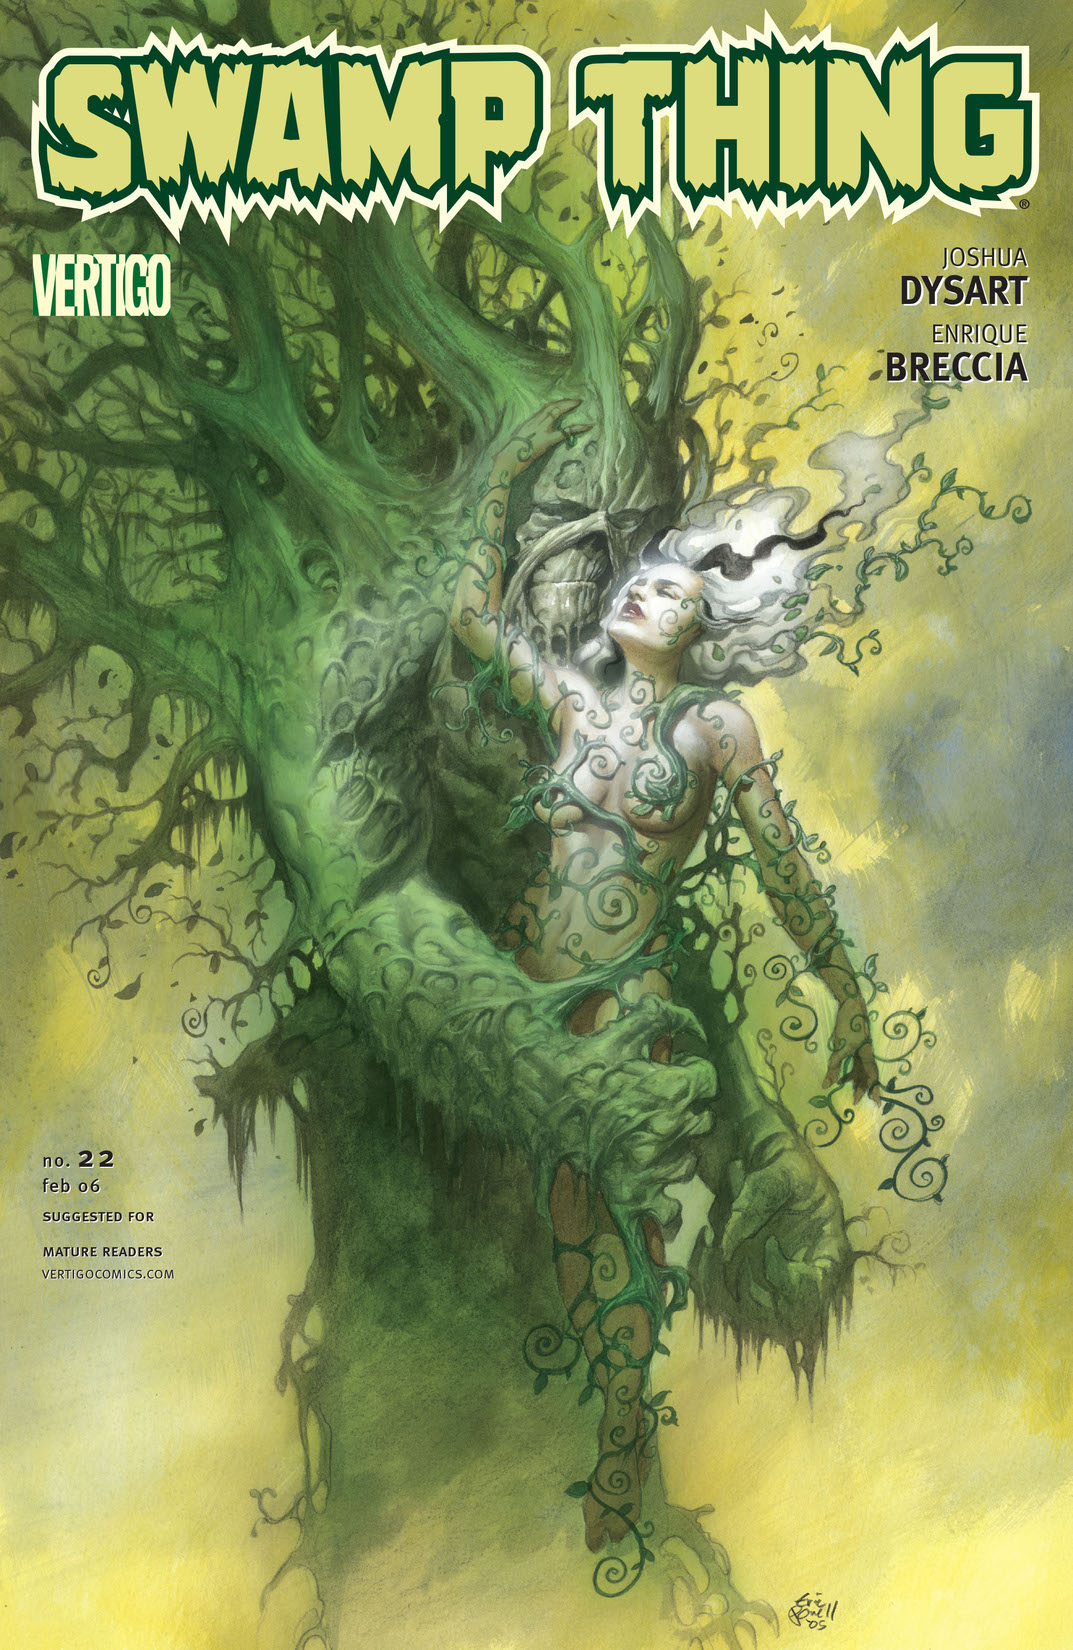 Swamp Thing (2004-) #22 preview images